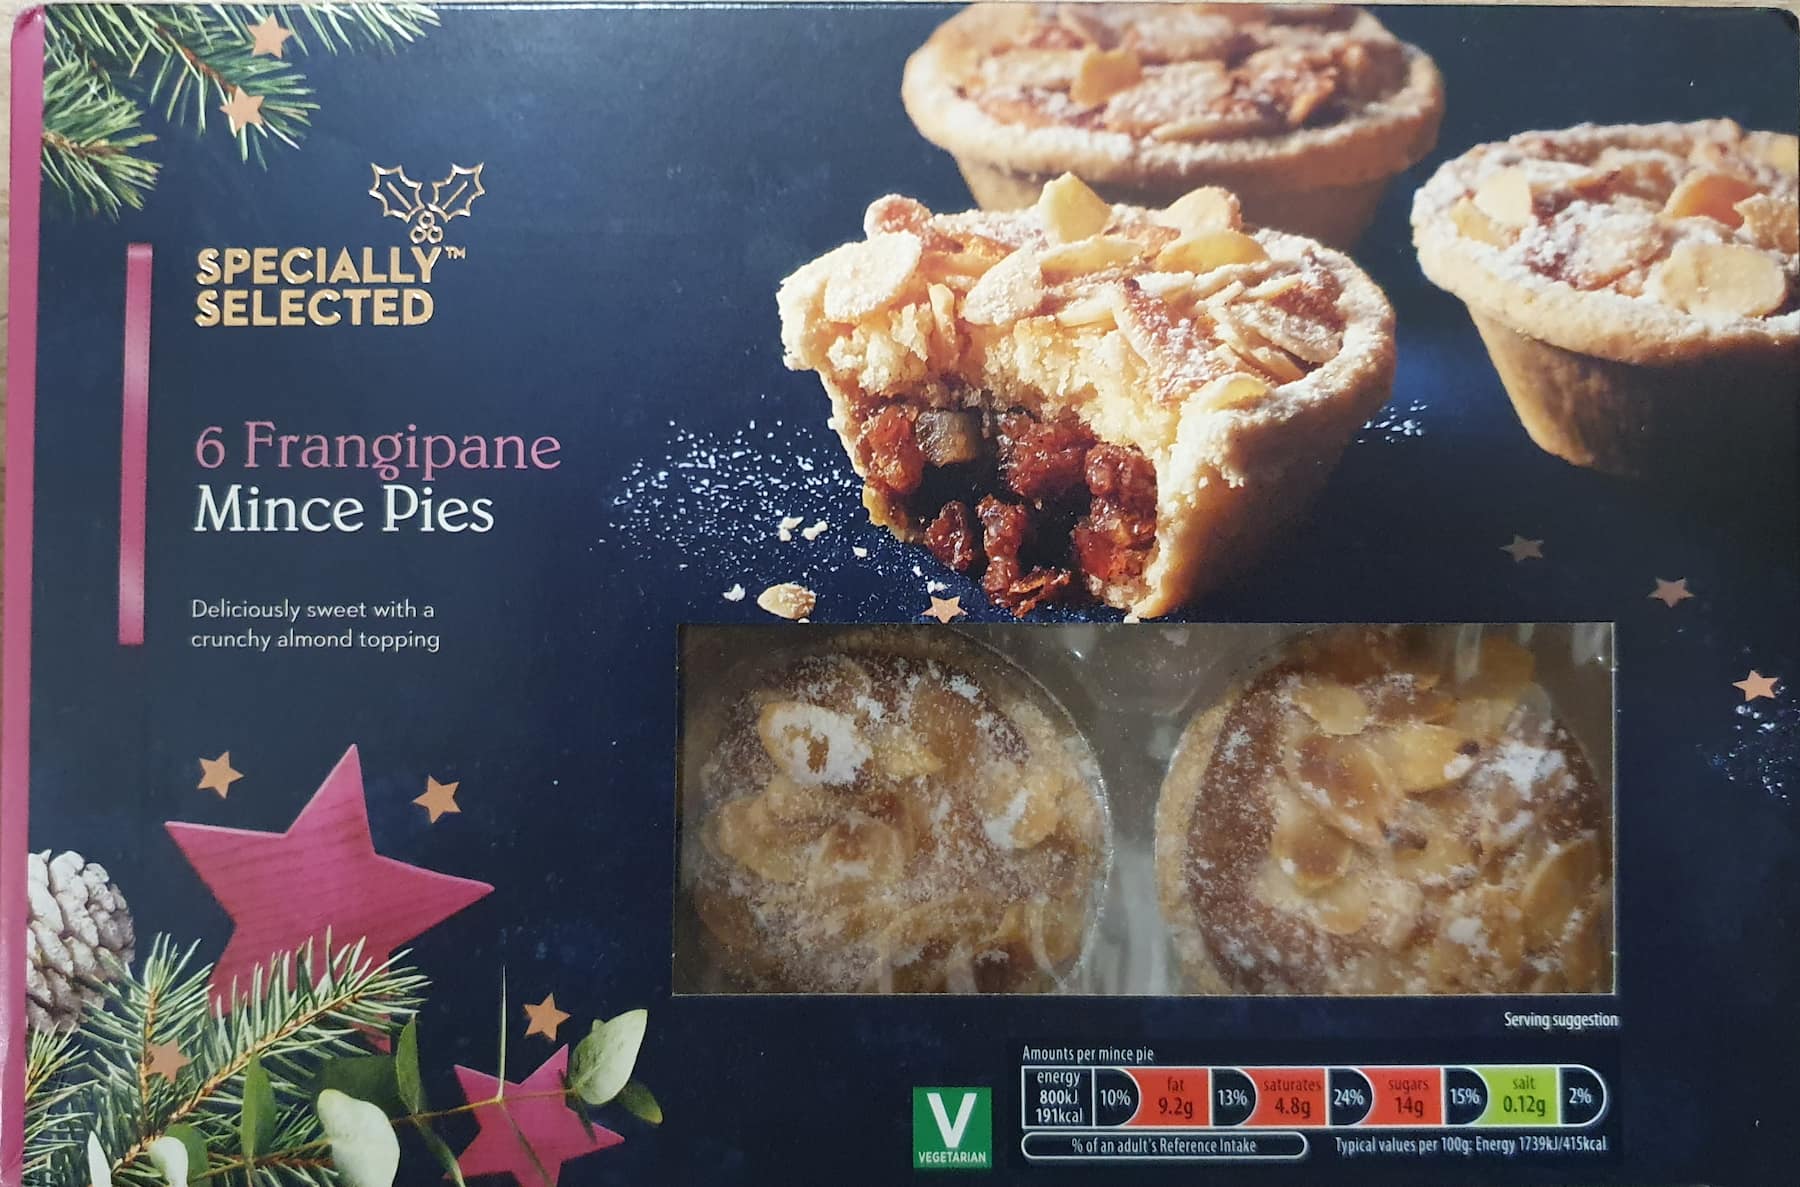 Aldi Specially Selected Frangipane Mince Pie Review 2021